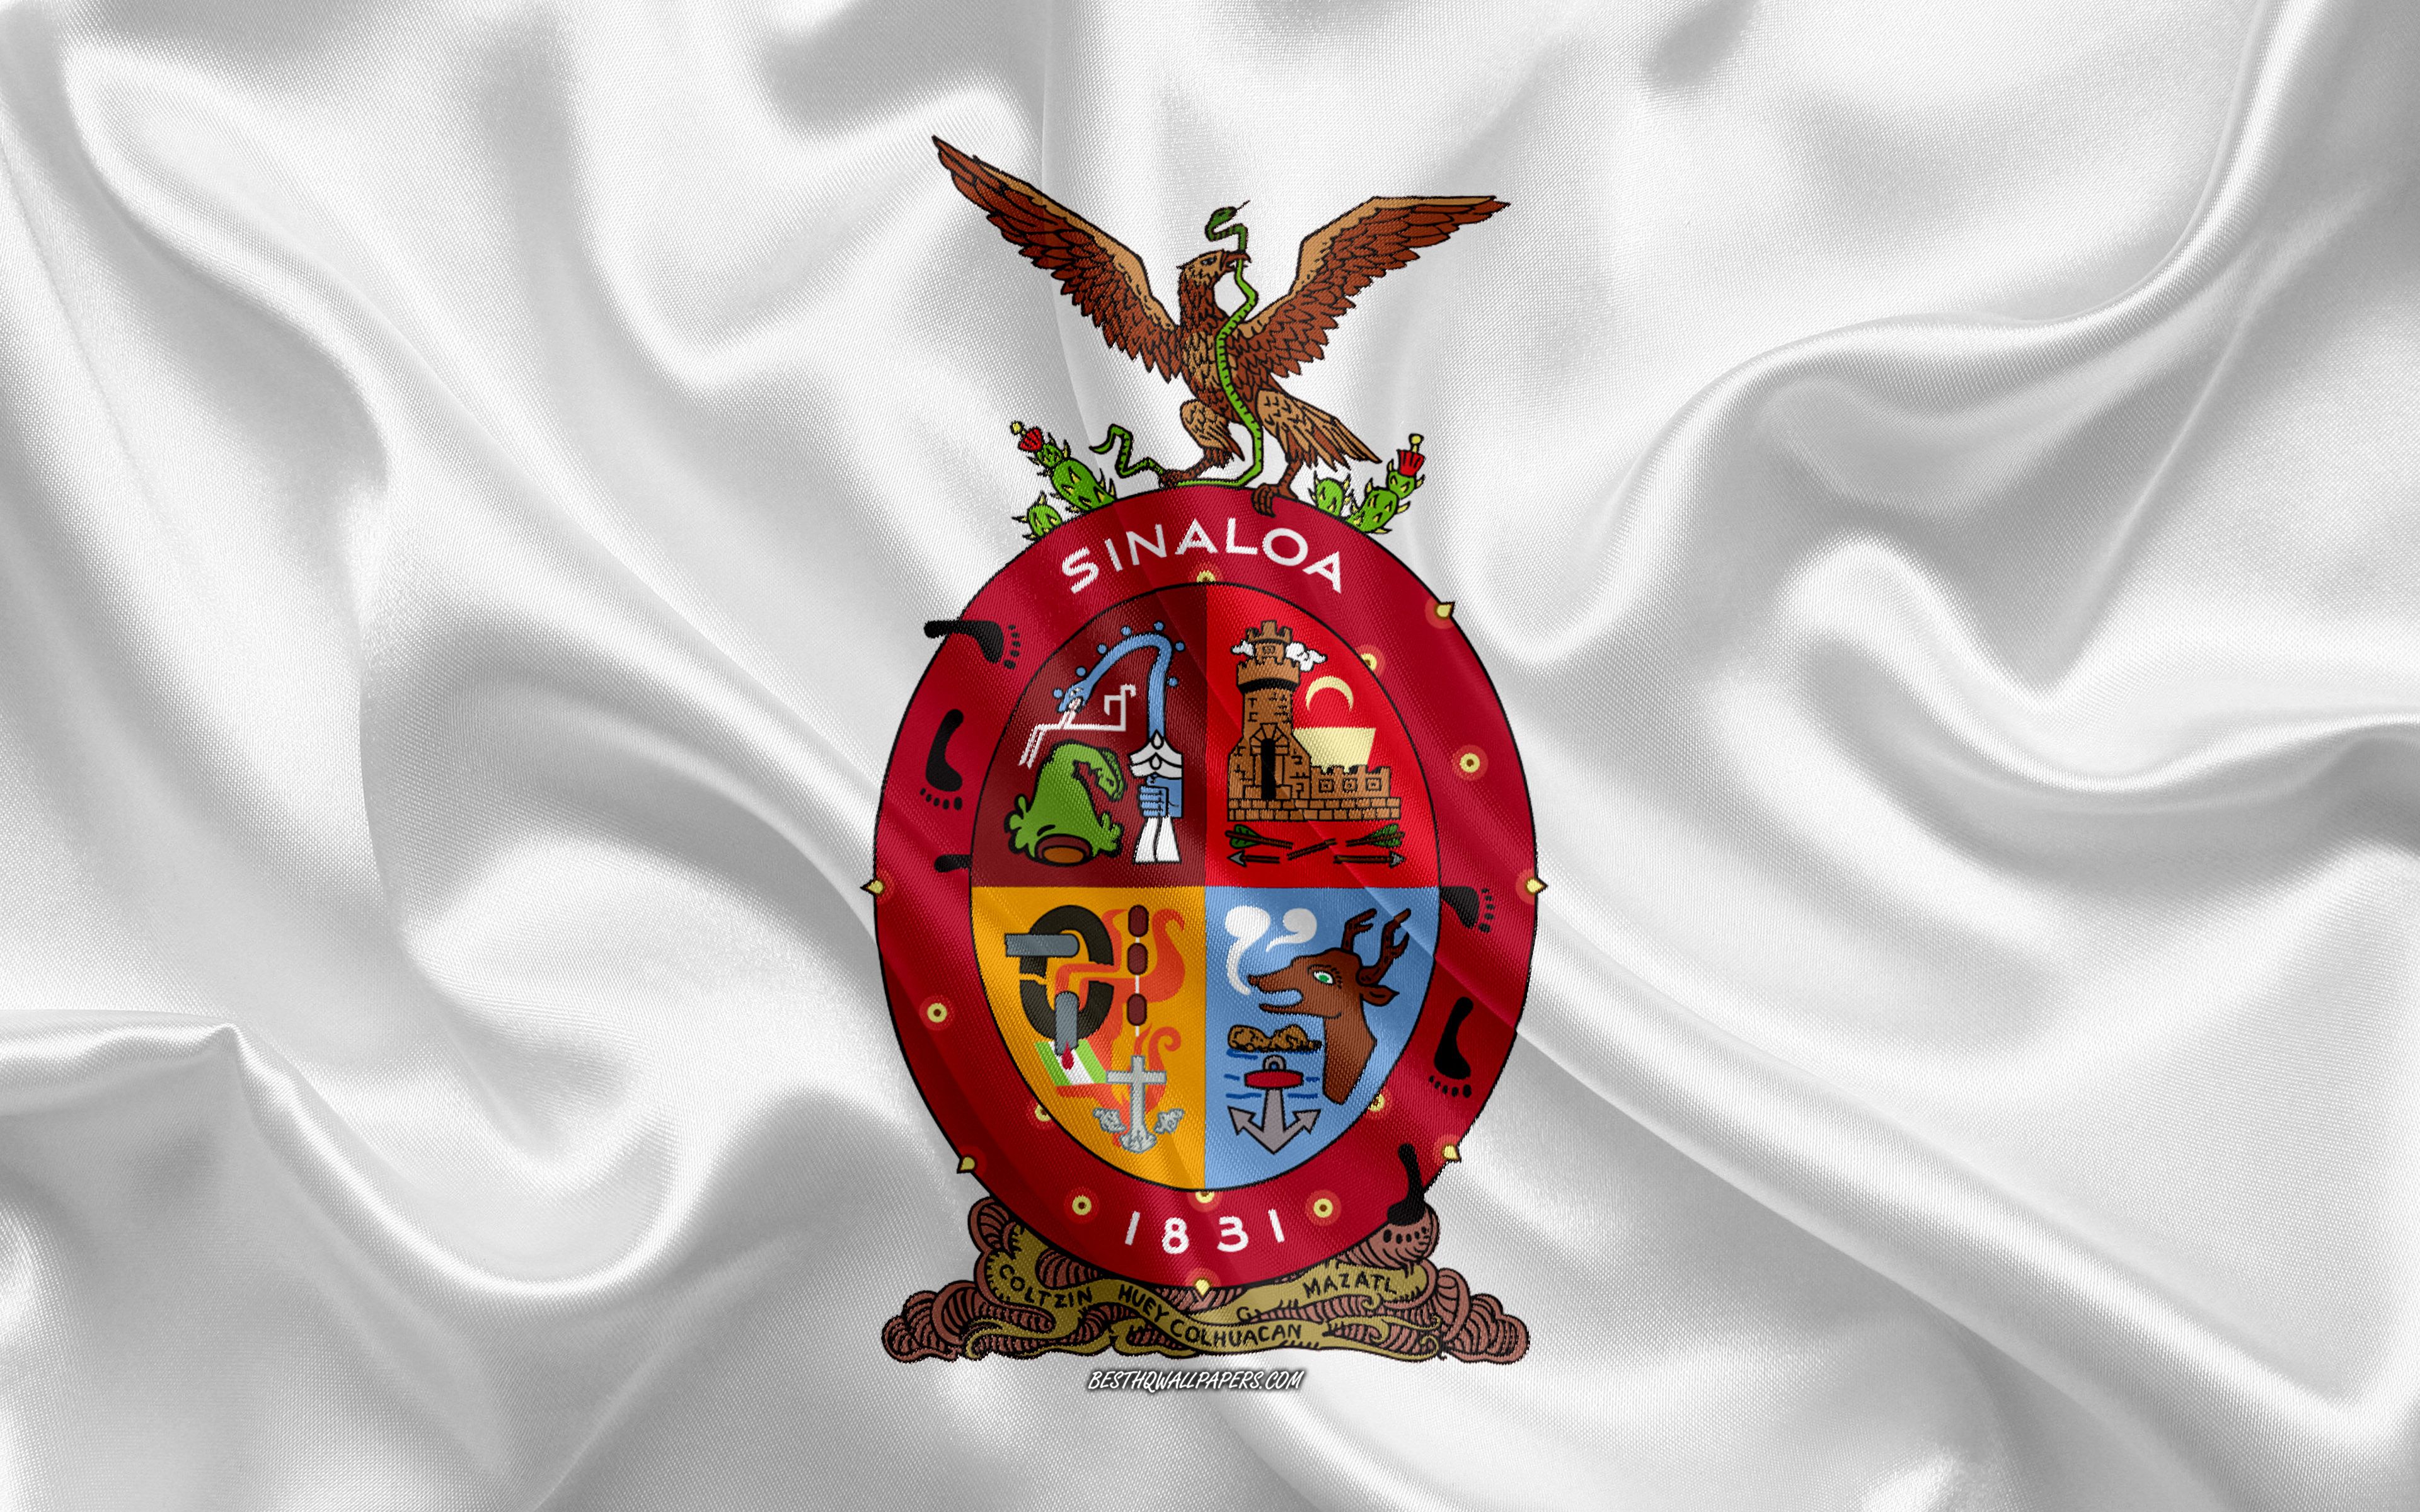 Download wallpaper Flag of Sinaloa, 4k, silk flag, Mexican state, Sinaloa flag, coat of arms, silk texture, Sinaloa, Mexico for desktop with resolution 3840x2400. High Quality HD picture wallpaper